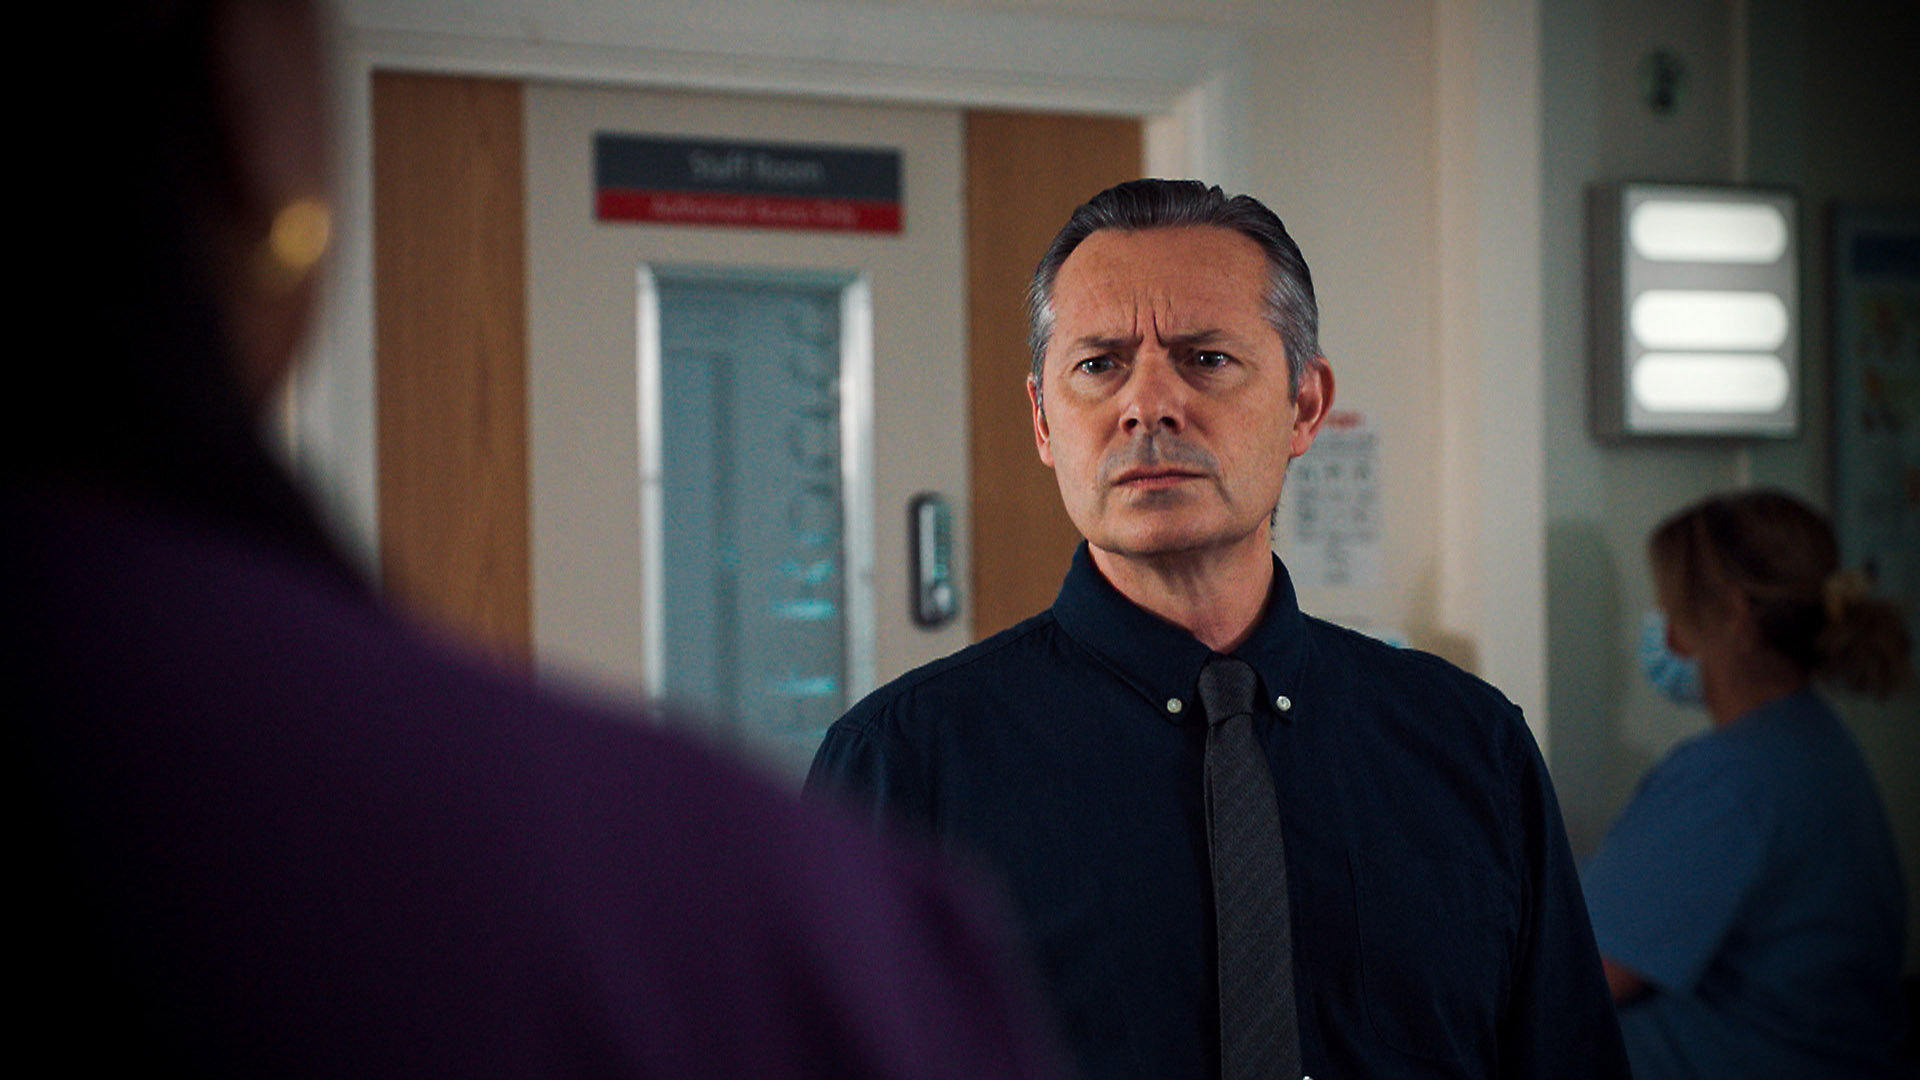 Visiting doctor Frazer Forbes meets his match in 'Holby City'